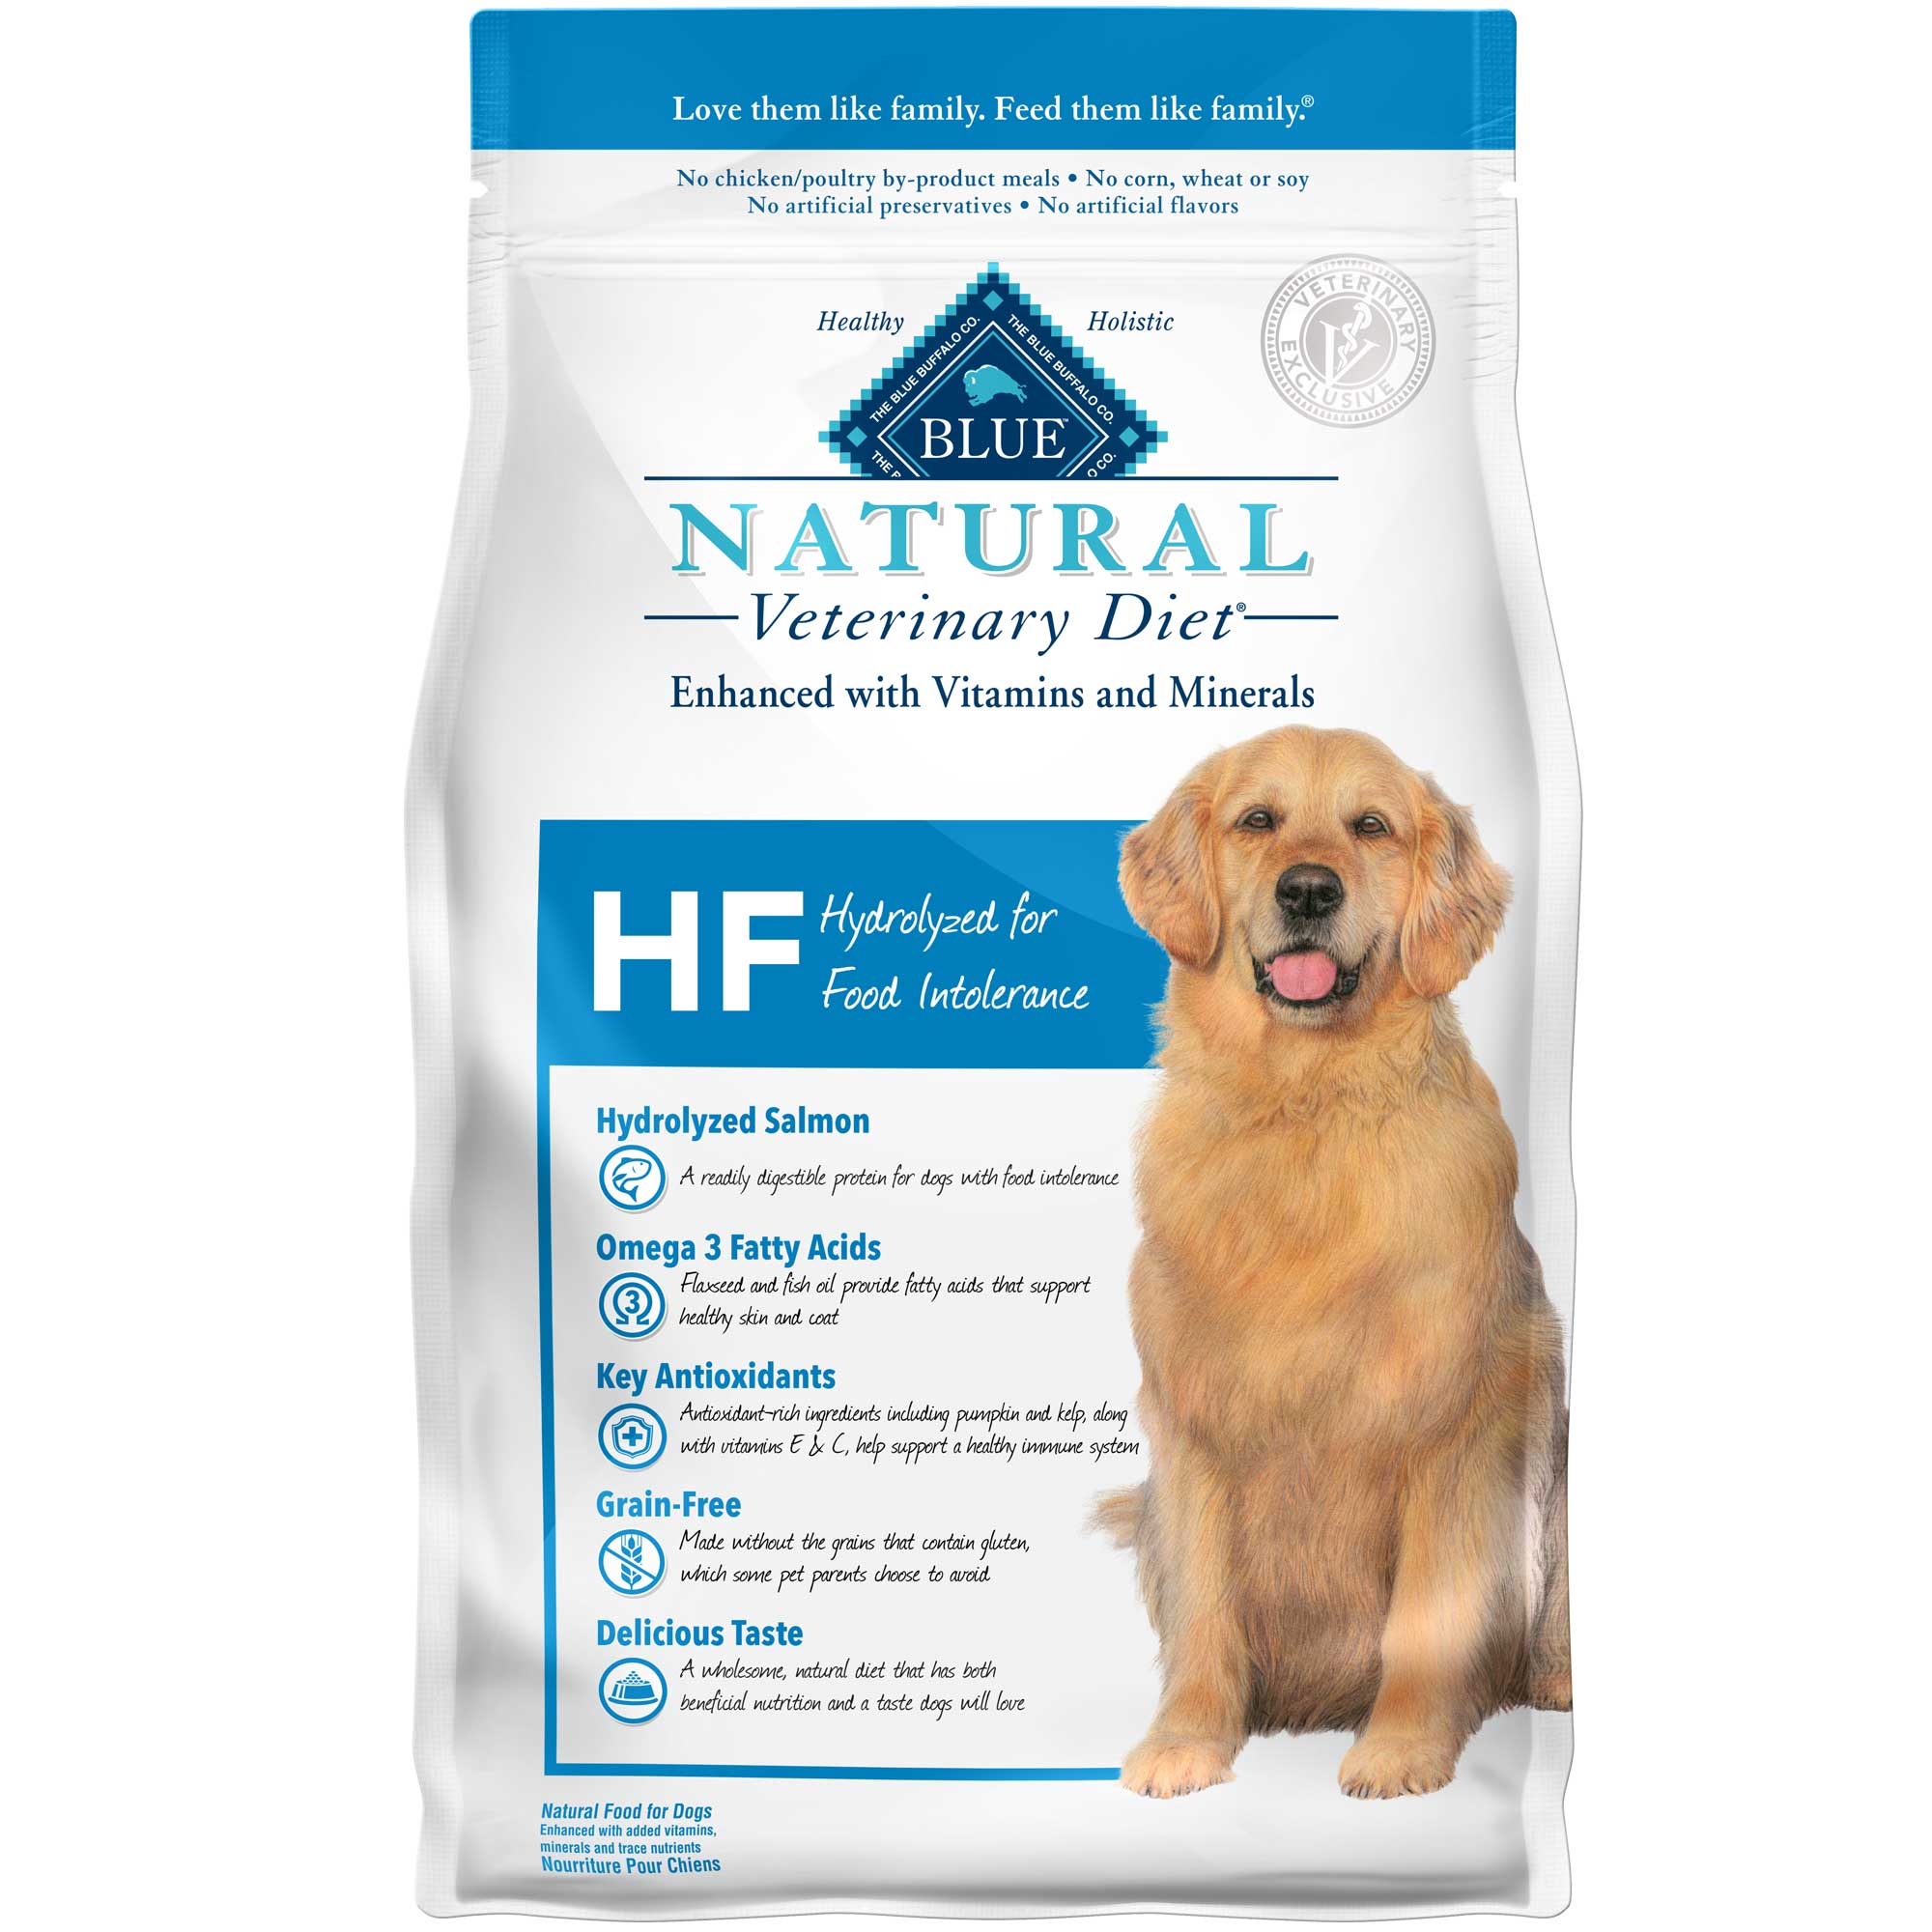 BLUE Natural Veterinary Diet HF Hydrolyzed for Food Intolerance Dry Dog Food Usage